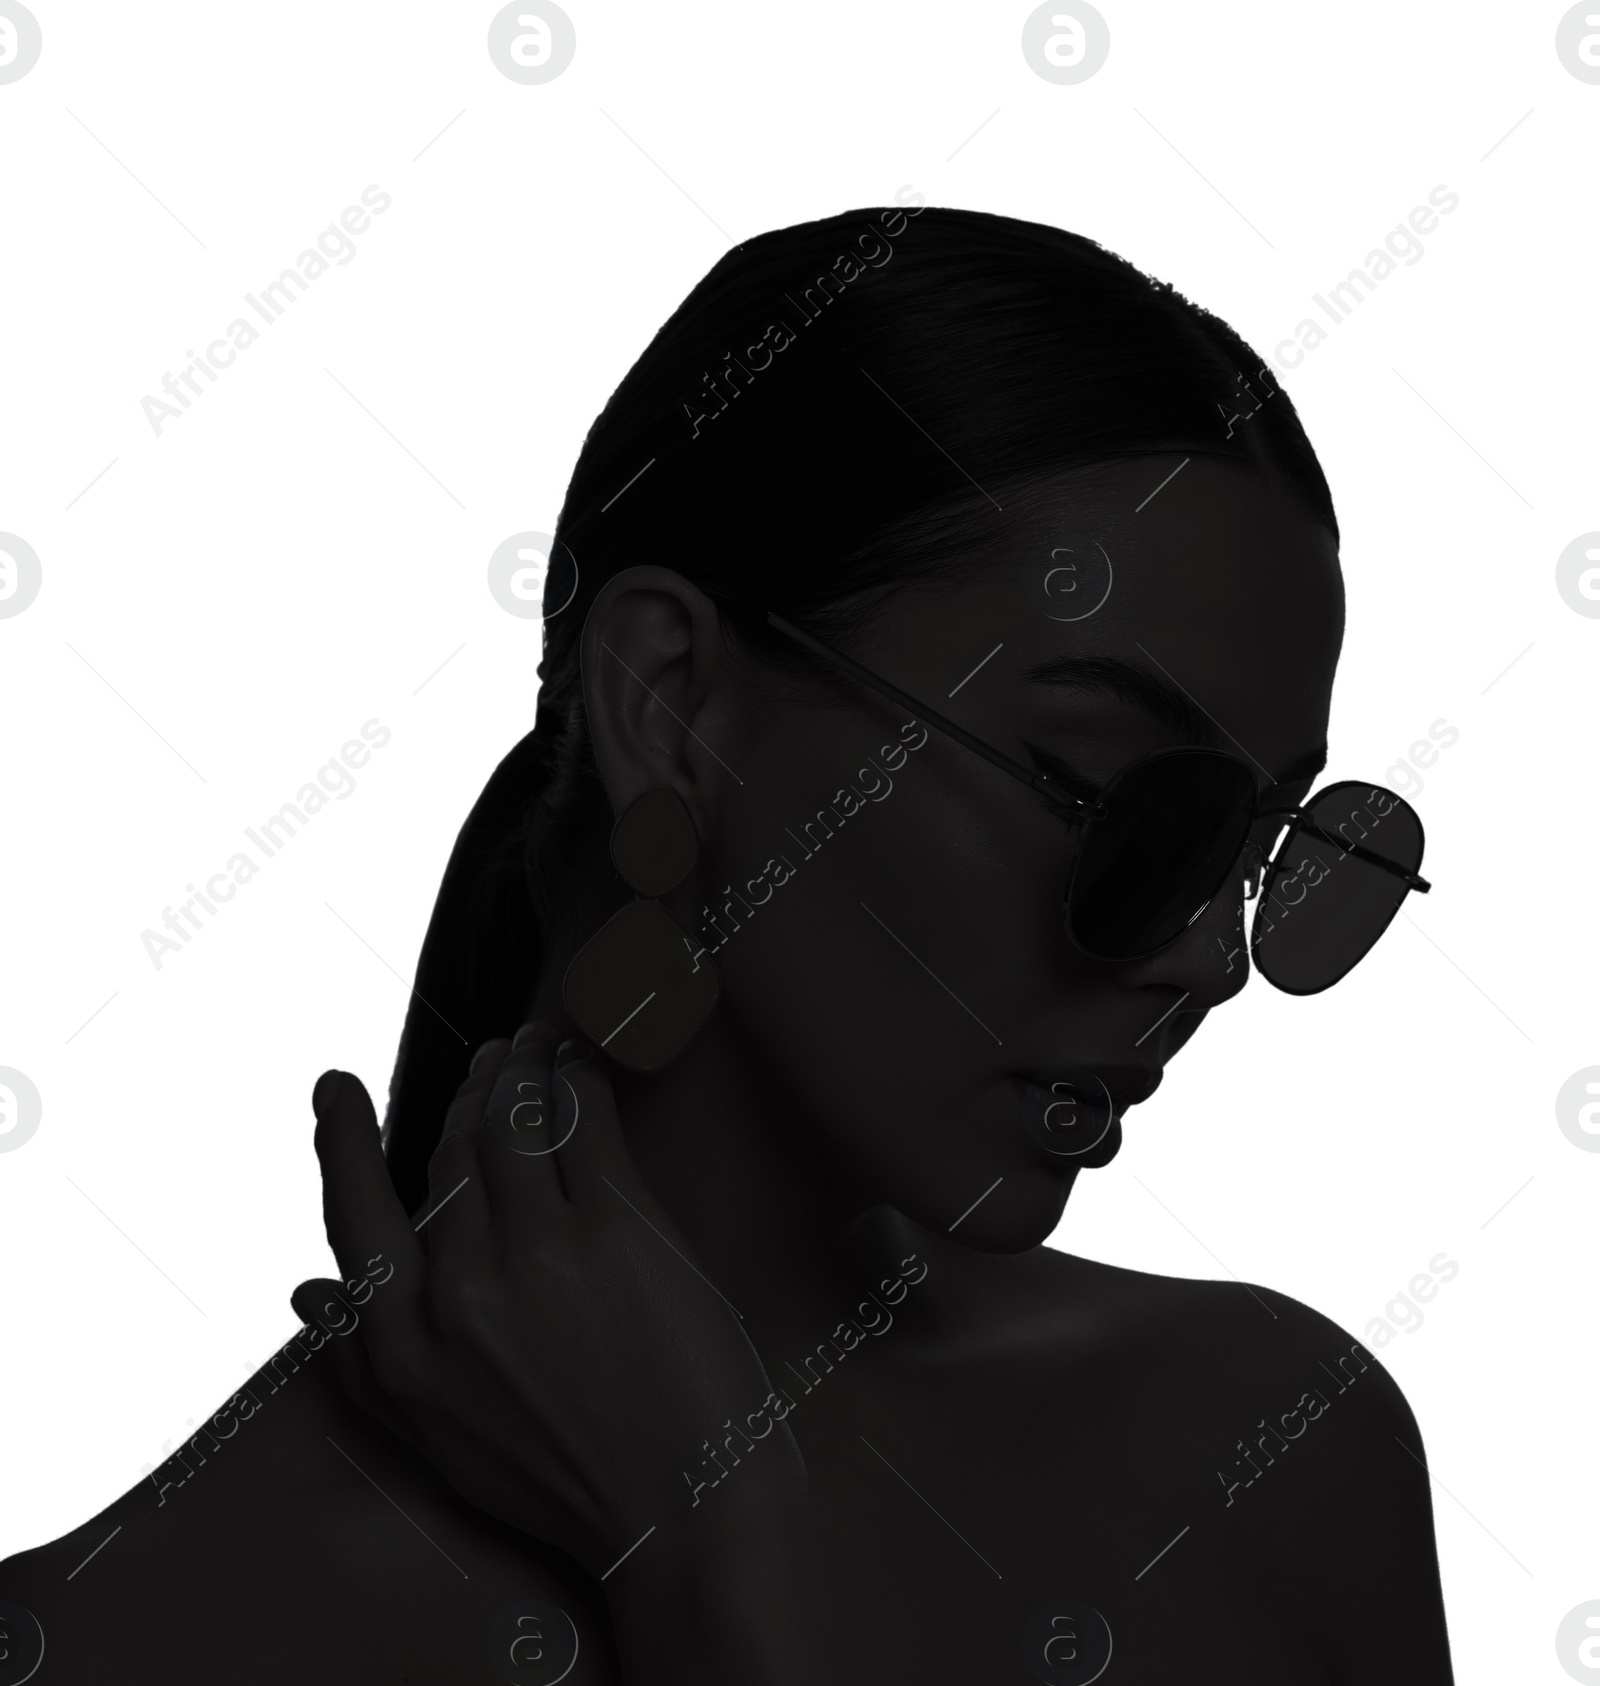 Image of Silhouette of woman with sunglasses isolated on white